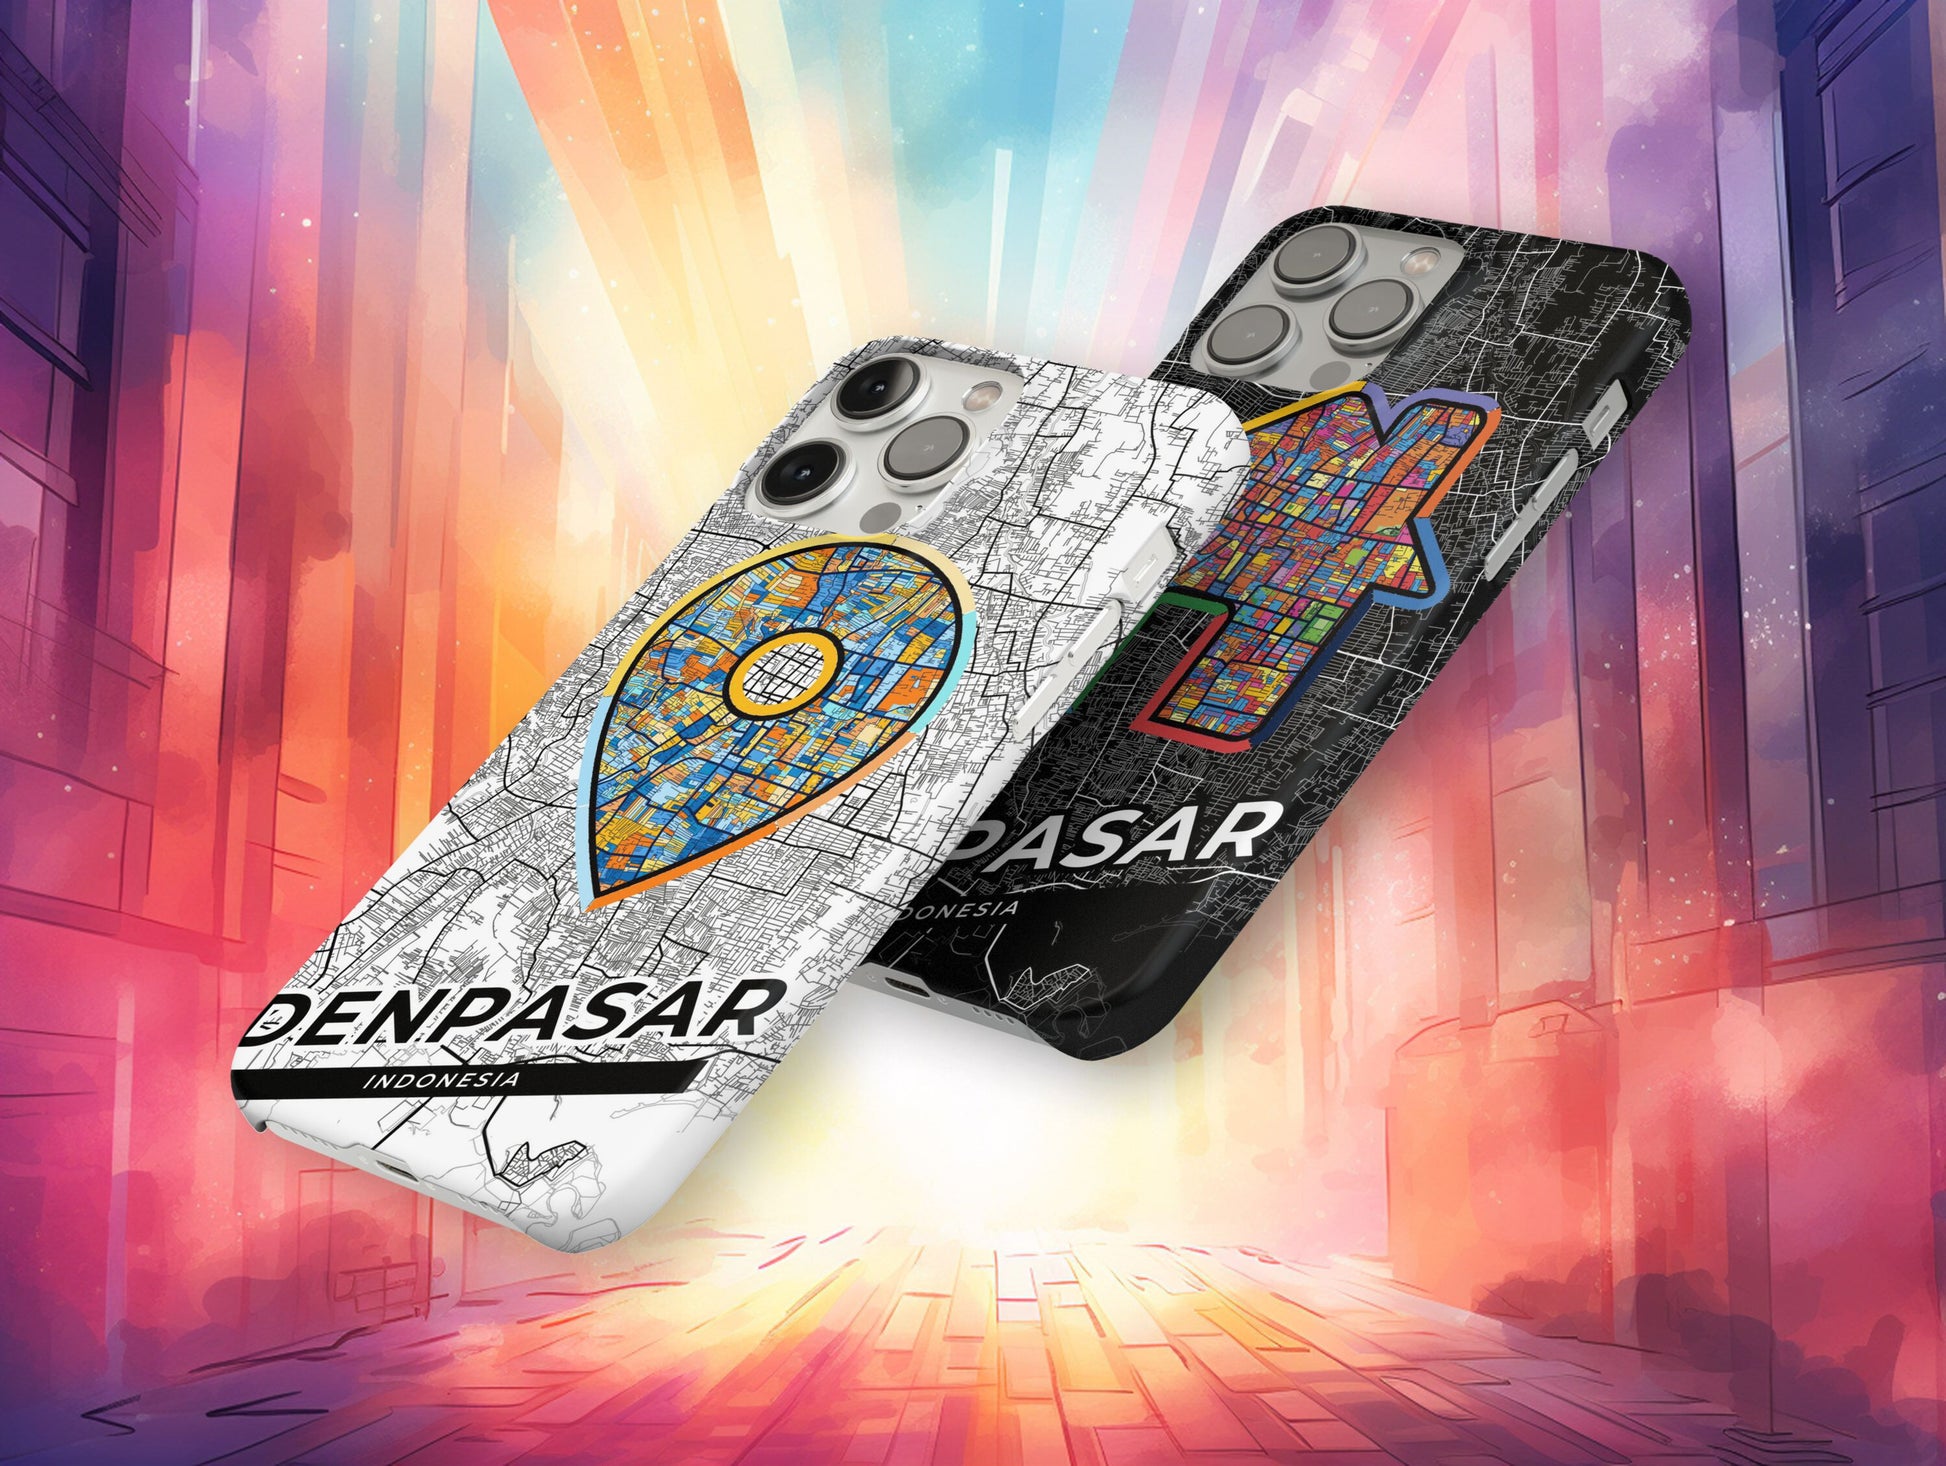 Denpasar Indonesia slim phone case with colorful icon. Birthday, wedding or housewarming gift. Couple match cases.